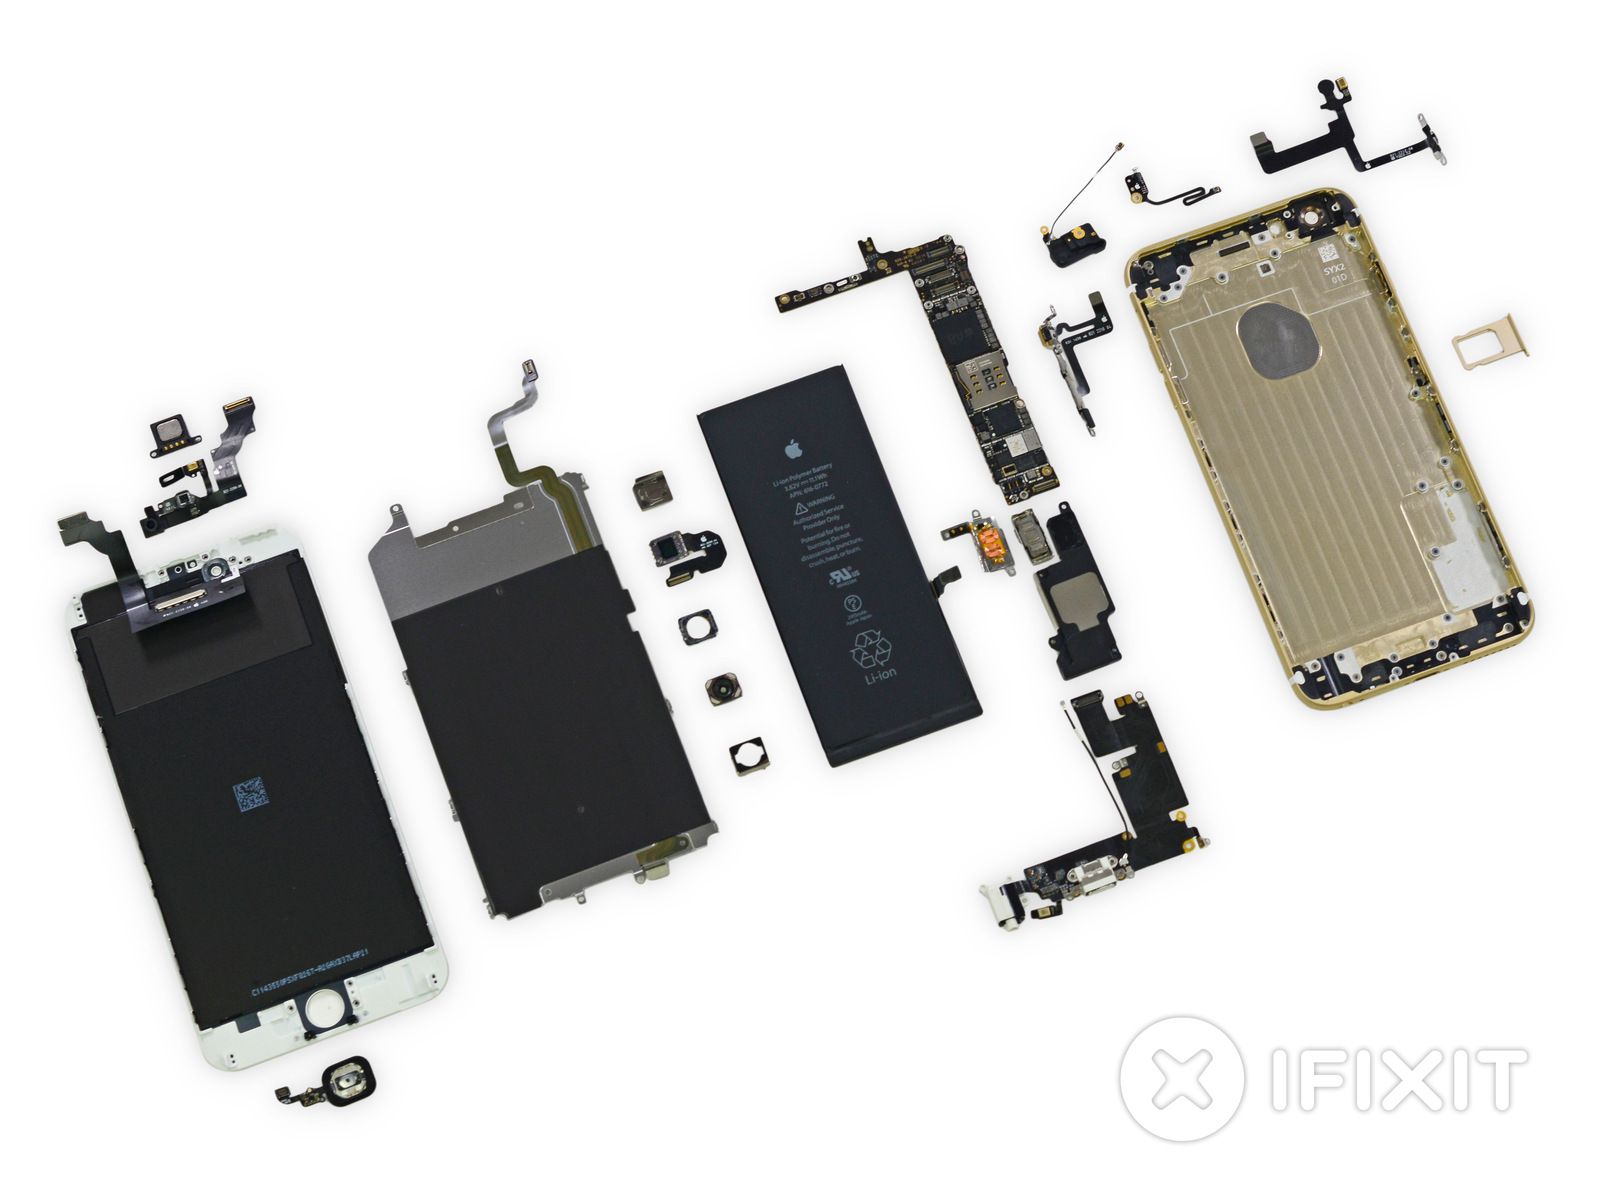 iphone 6 plus teardown reveals it s easier to fix than iphone 5s image 1